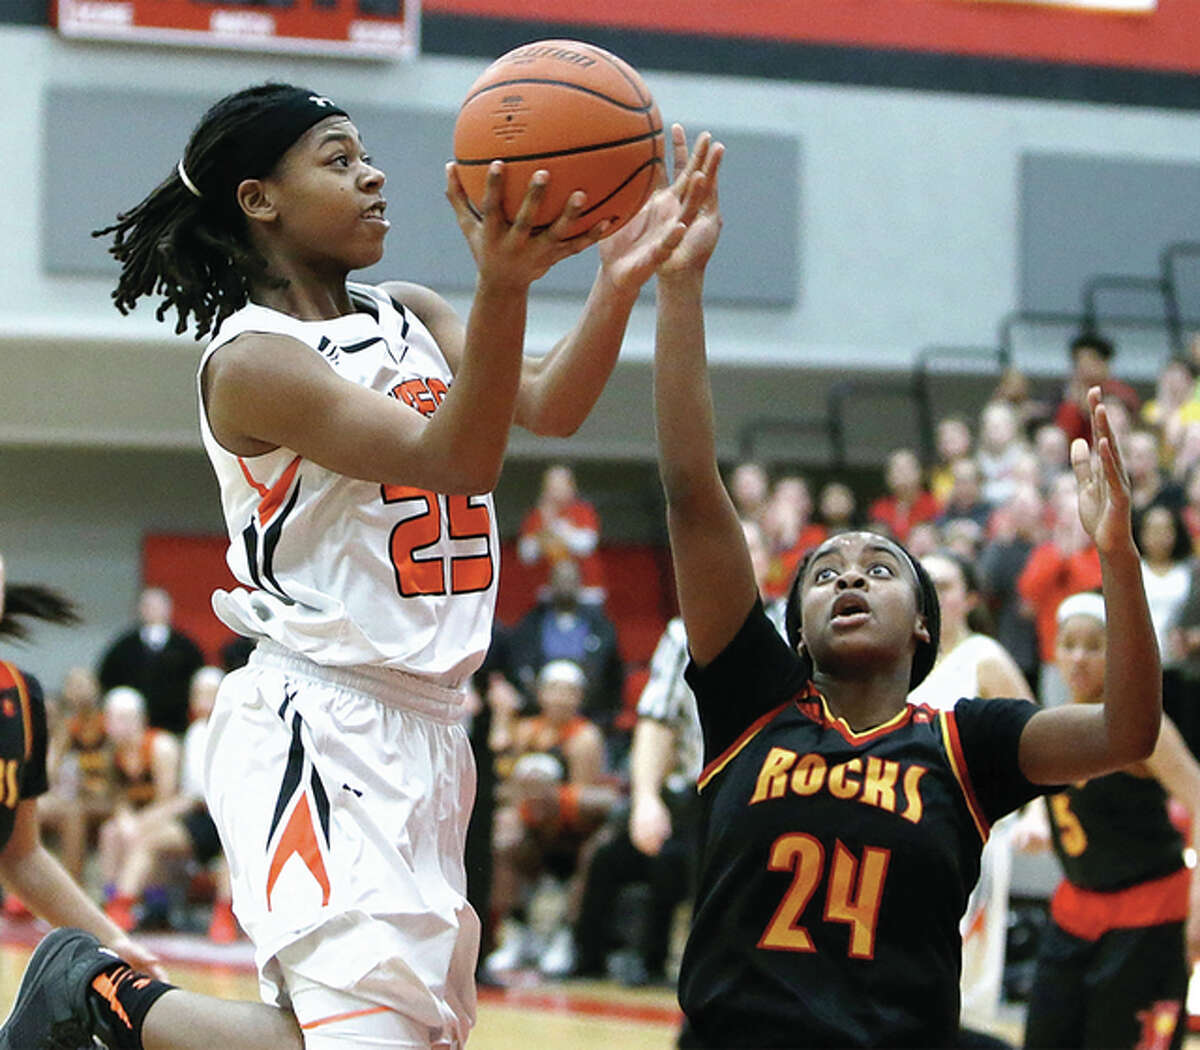 Edwardsville junior Criste’on Waters (left) puts up a shot over Rock Island’s Markyia Williams-Miles during the second half of the Tigers’ win in the Alton Class 4A Sectional championship game Thursday night at Alton High in Godfrey.